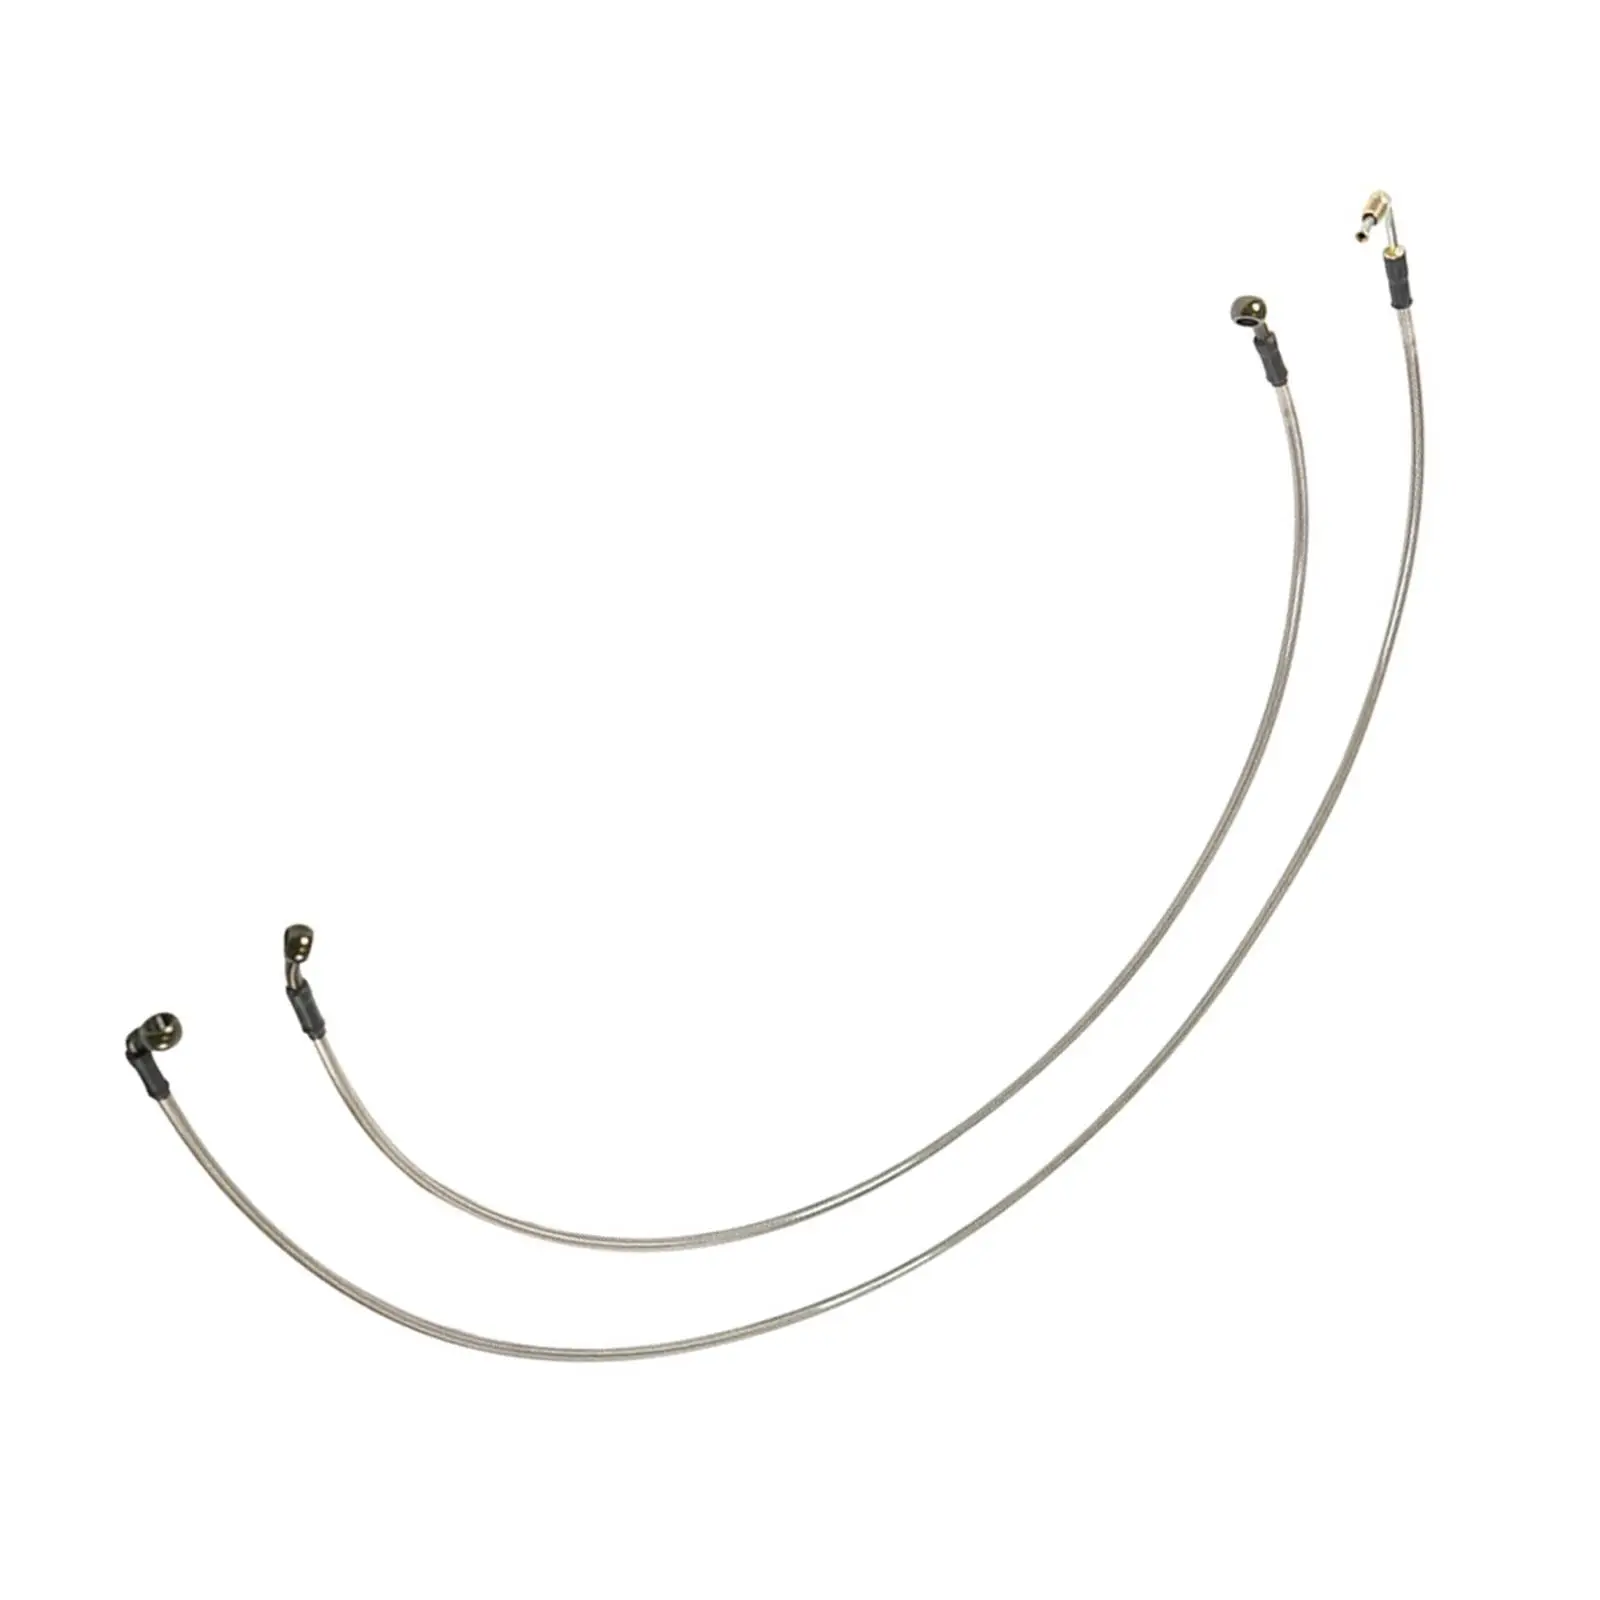 1Pair Extended Front/Rear Brake Lines for Polaris RZR 800 S 800 4 800 XP 900 570 XP 4 900